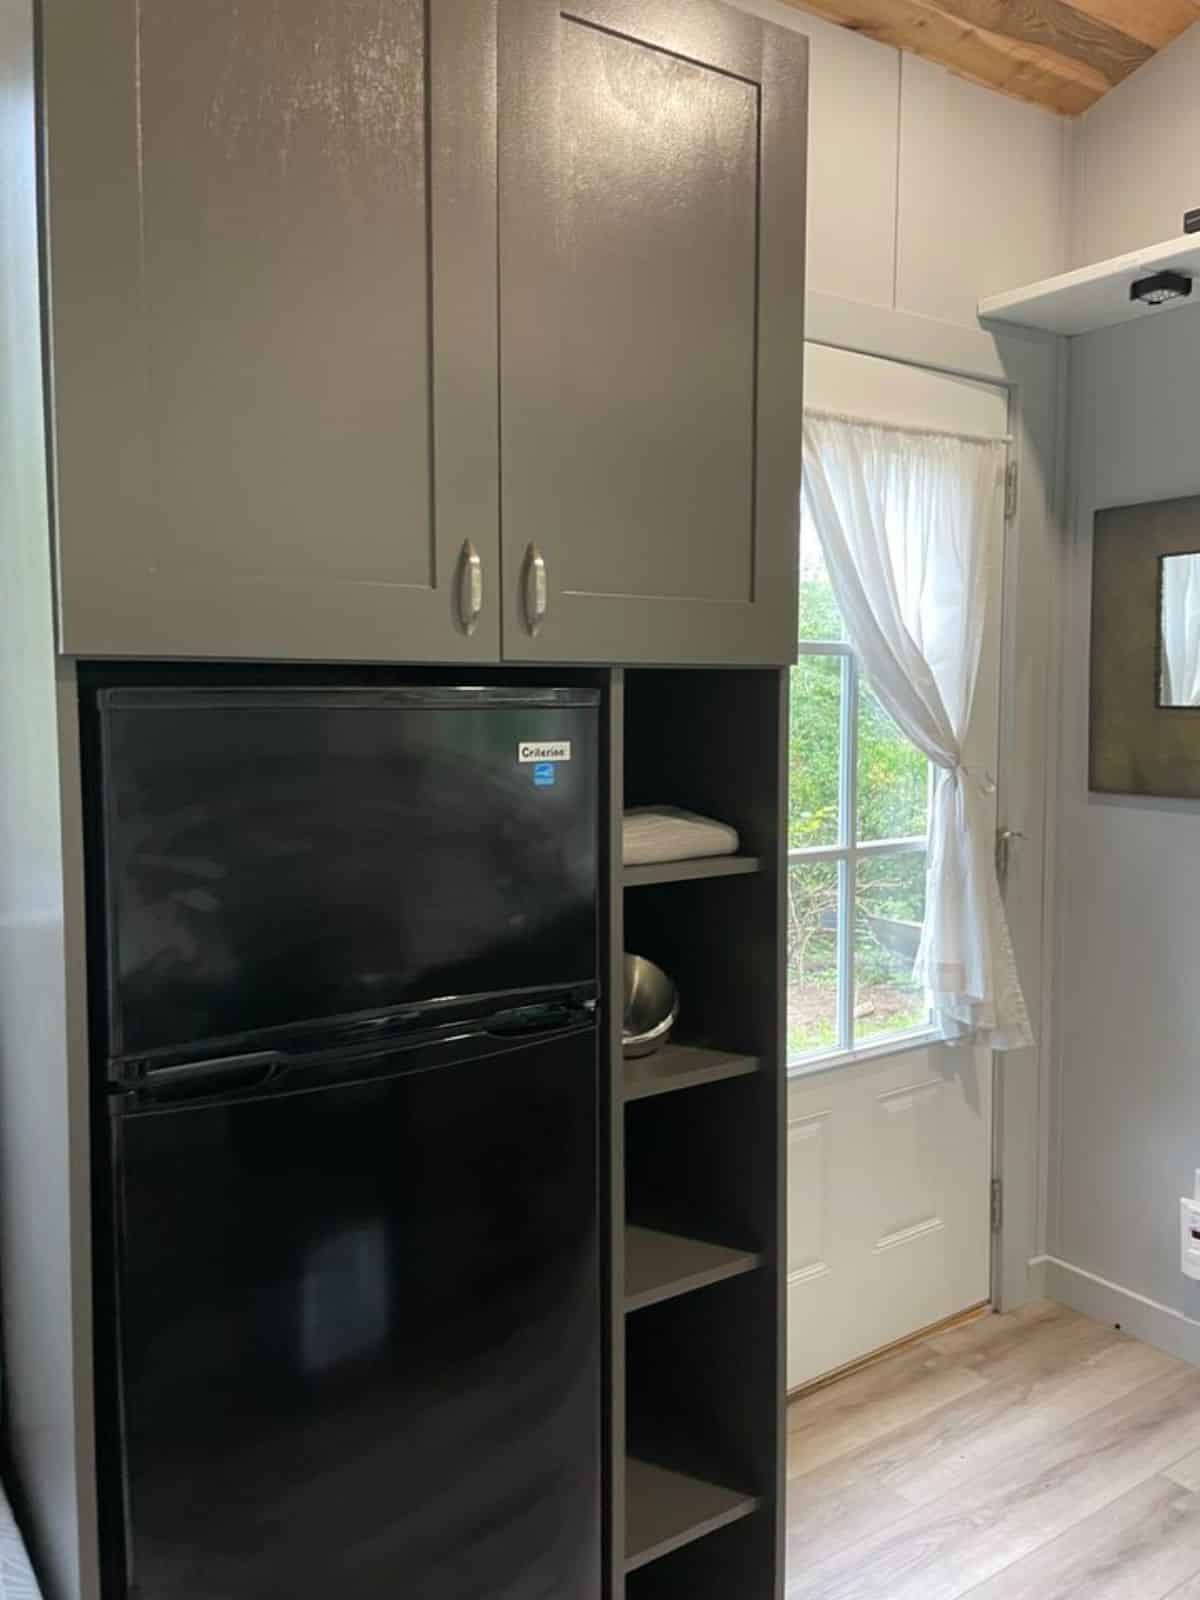 storage shelves and cabinets with full length refrigerator opposite to kitchen area of high end tiny home